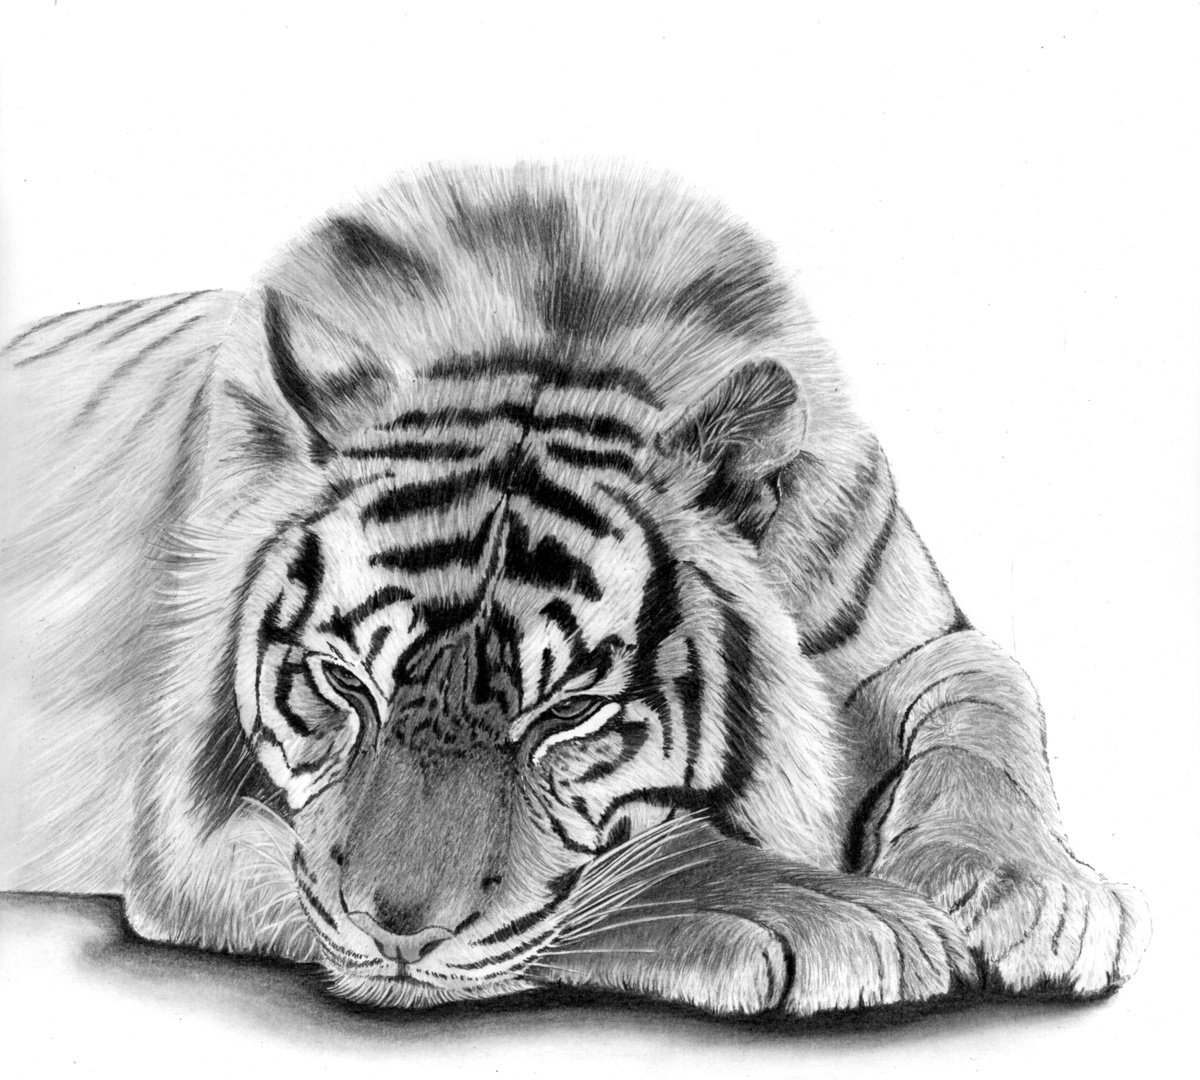 Melancholy Tiger by Paul Stowe